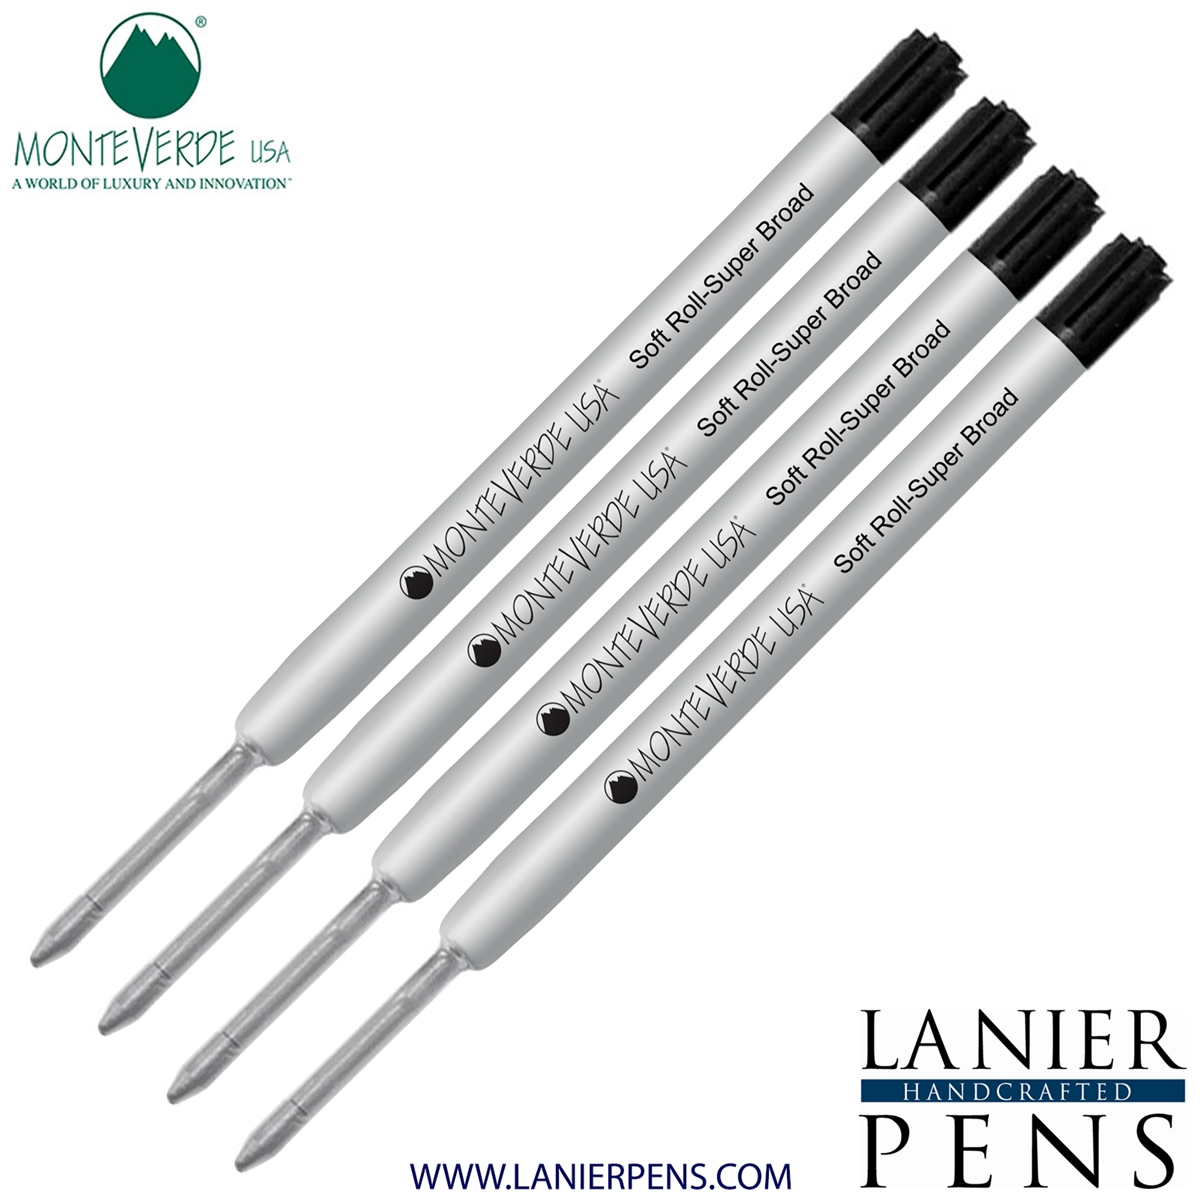 4 Pack - Monteverde Soft Roll Super Broad Ballpoint P15 Paste Ink Refill Compatible with most Parker Style Ballpoint Pens - Black (Super Broad Tip 1.4mm) - Lanier Pens